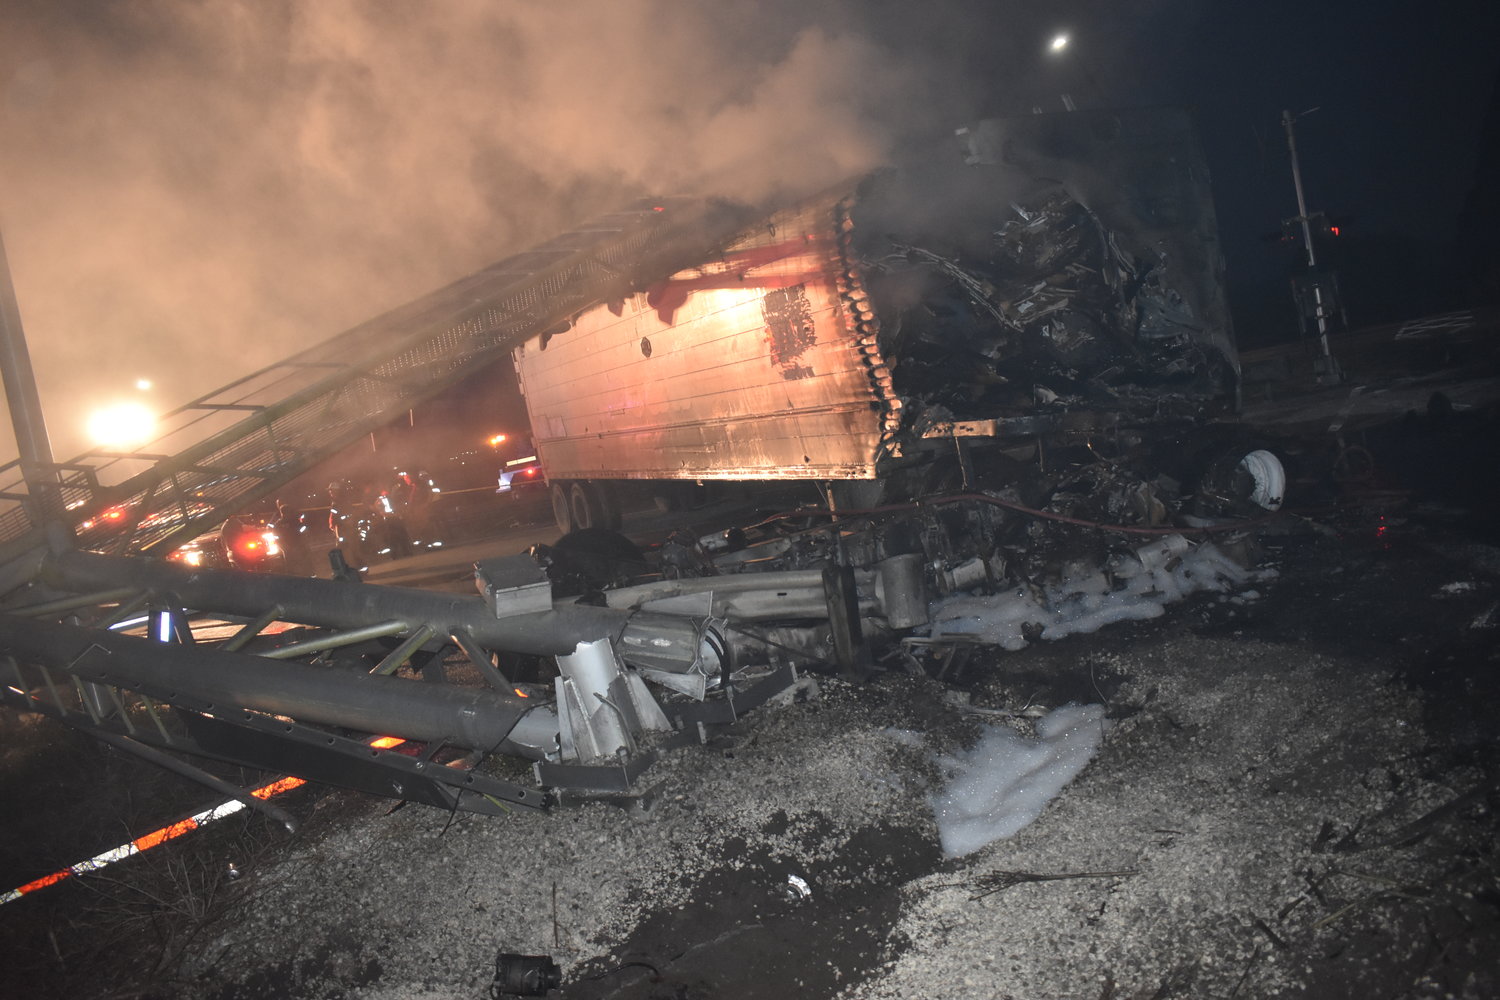 CLEWISTON -- An Opa Locka man was killed early Nov. 28 when the semi he was driving collided with a train. As a result of the crash, the semi was engulfed in flames. [Photo courtesy FHP]